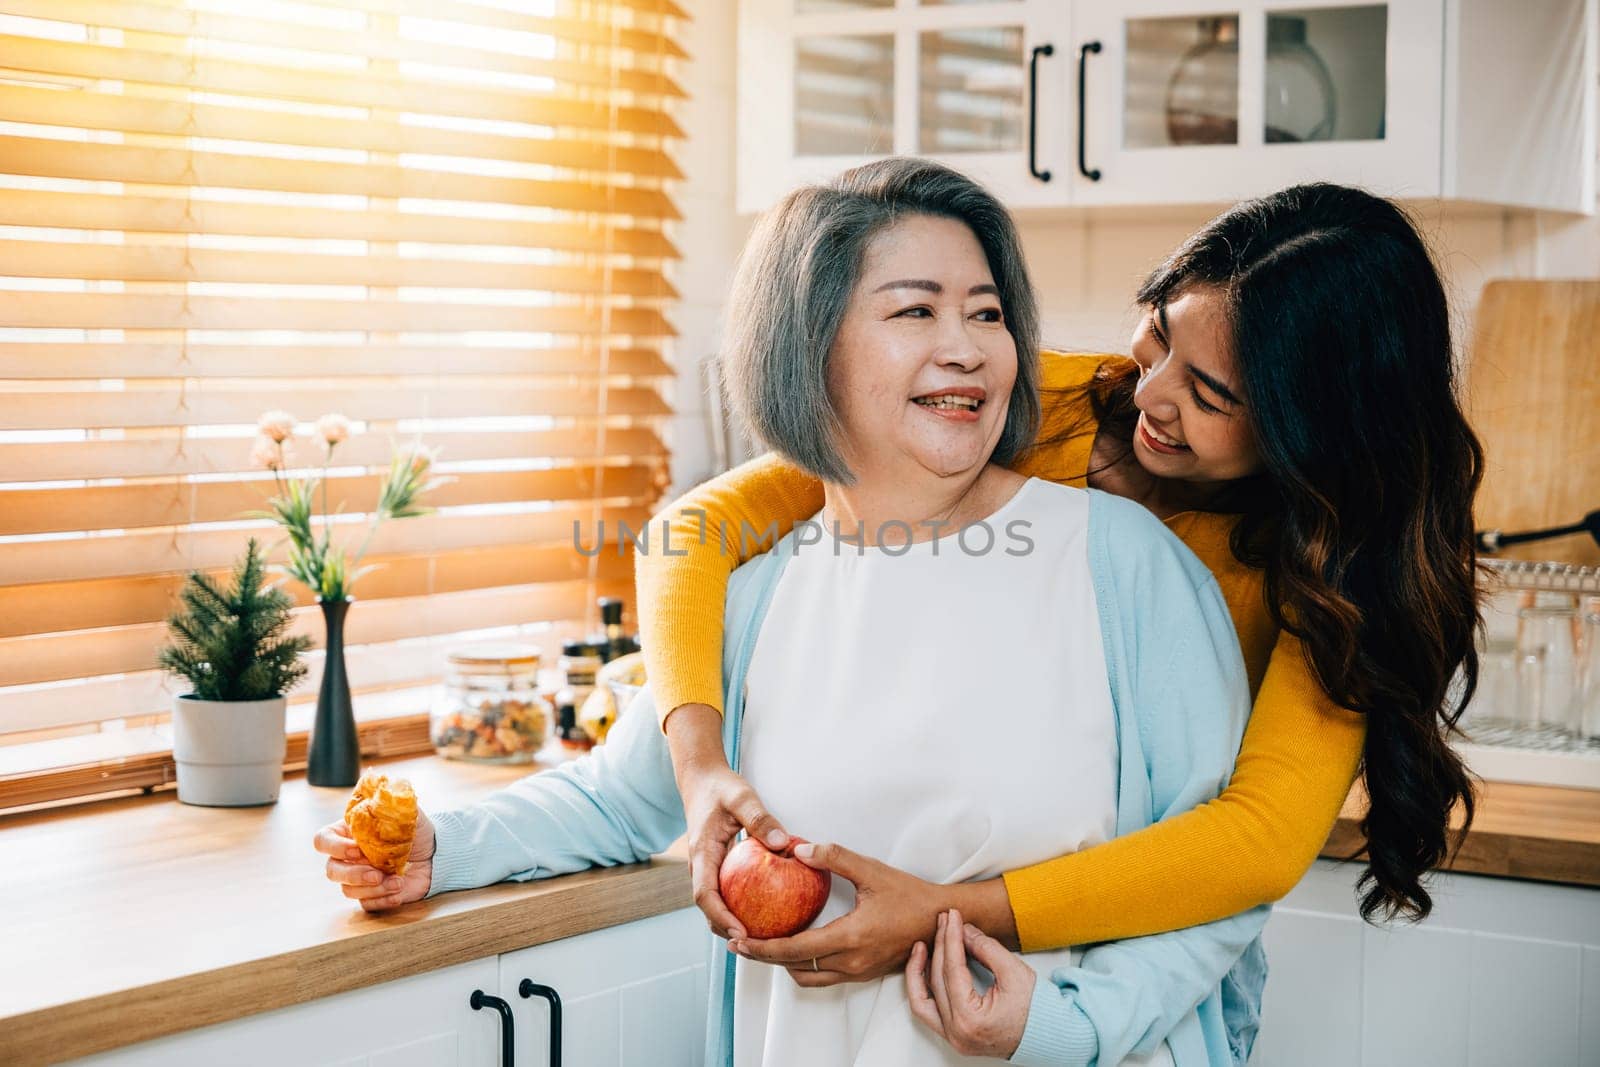 A smiling old woman stands in the kitchen, her adult daughter, a cheerful young woman in an apron, holds an apple. Their bond exemplifies the joy of teaching, learning, and family togetherness.